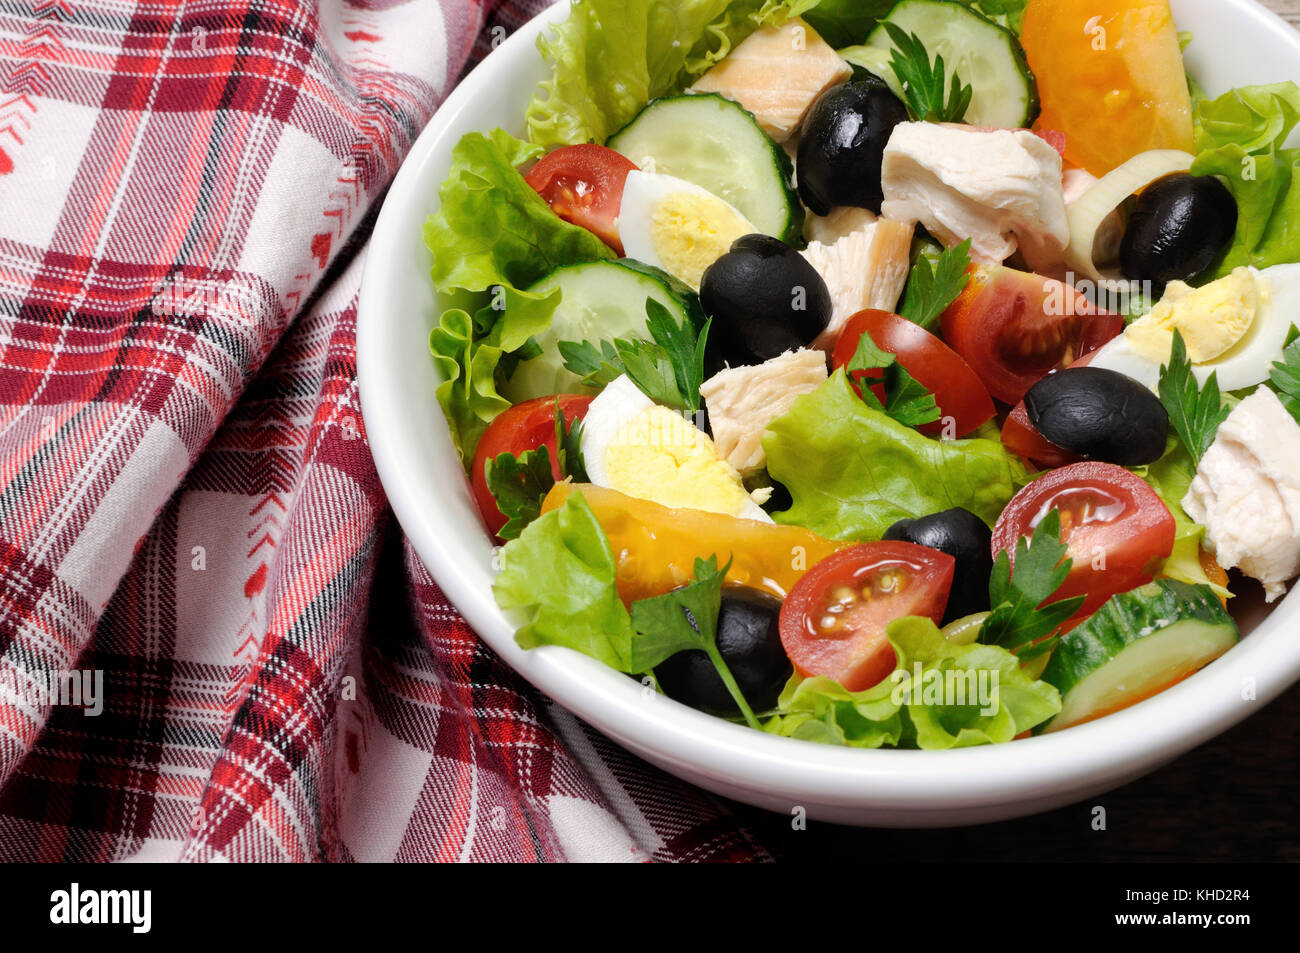 Vegetable salad with chicken and eggs, olives in lettuce leaves. Horizontal shot. Stock Photo